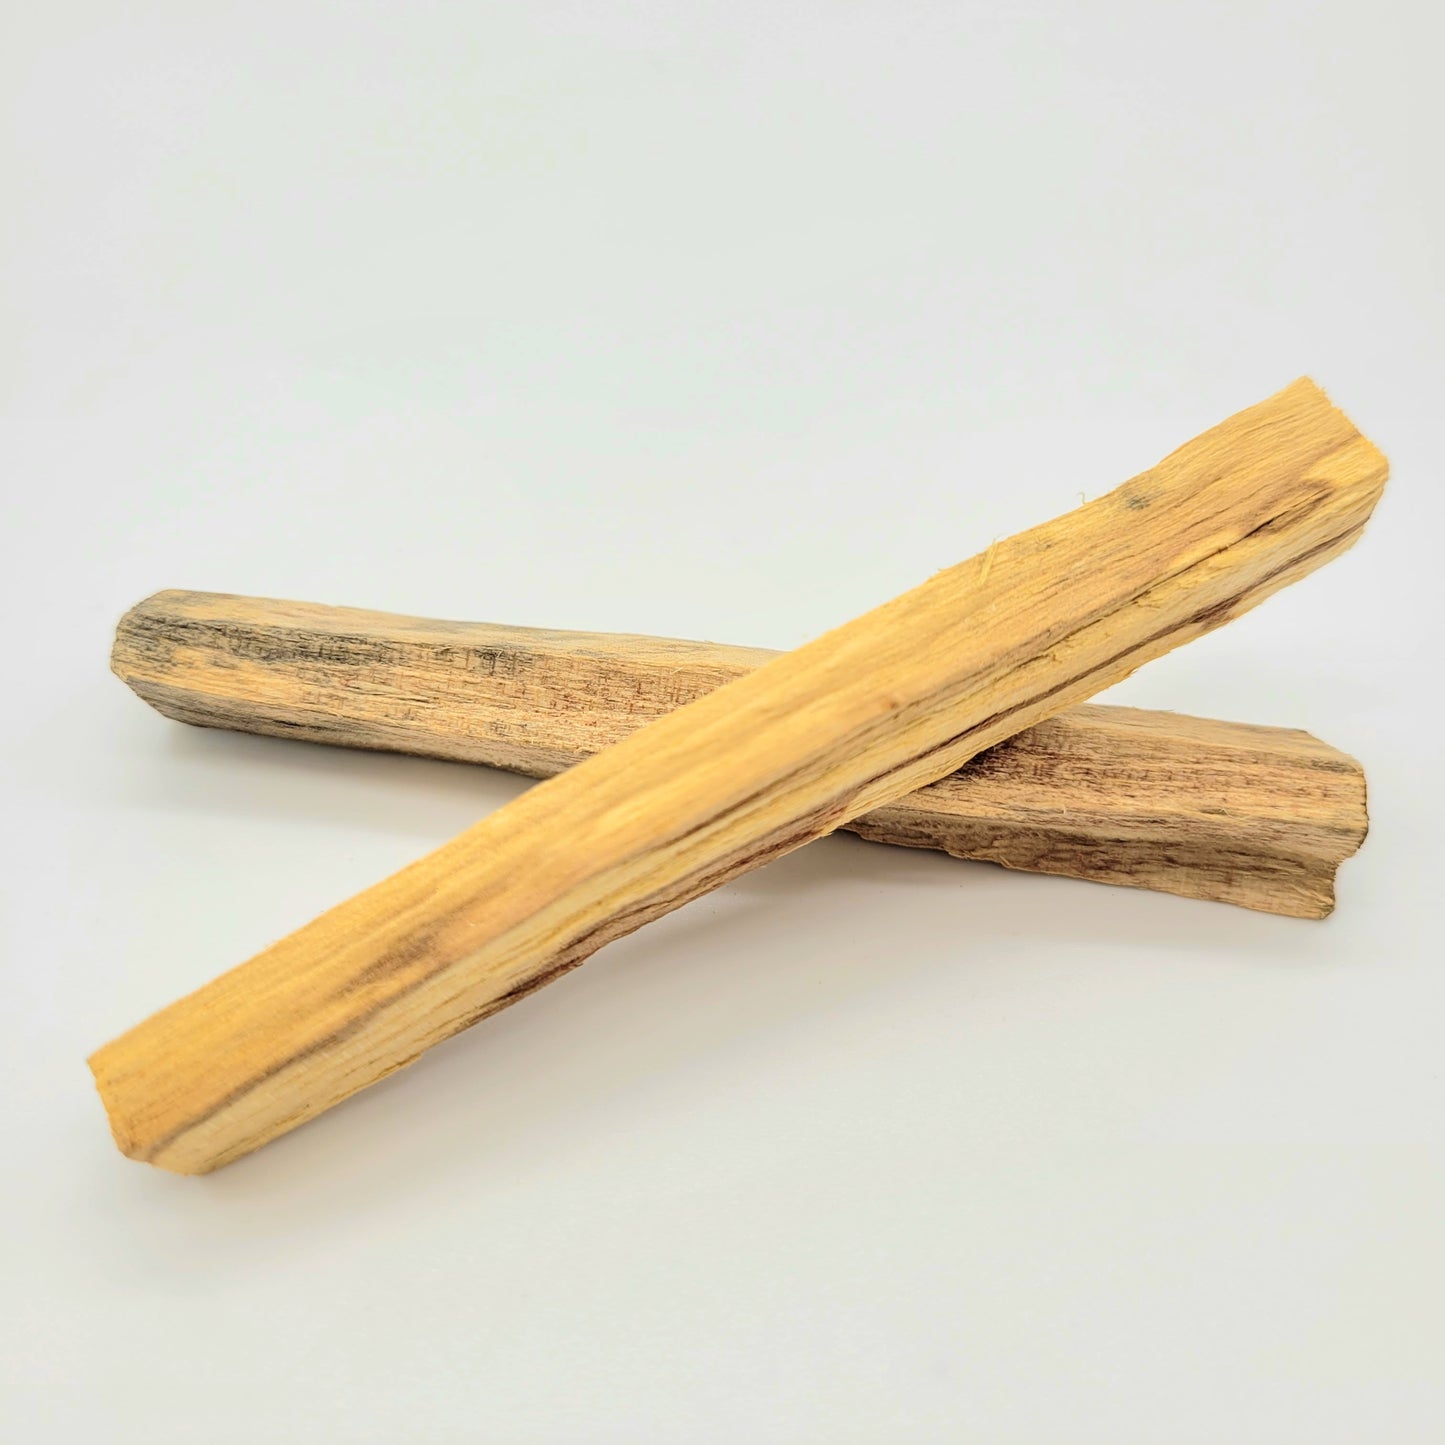 Sustainably sourced Palo Santo